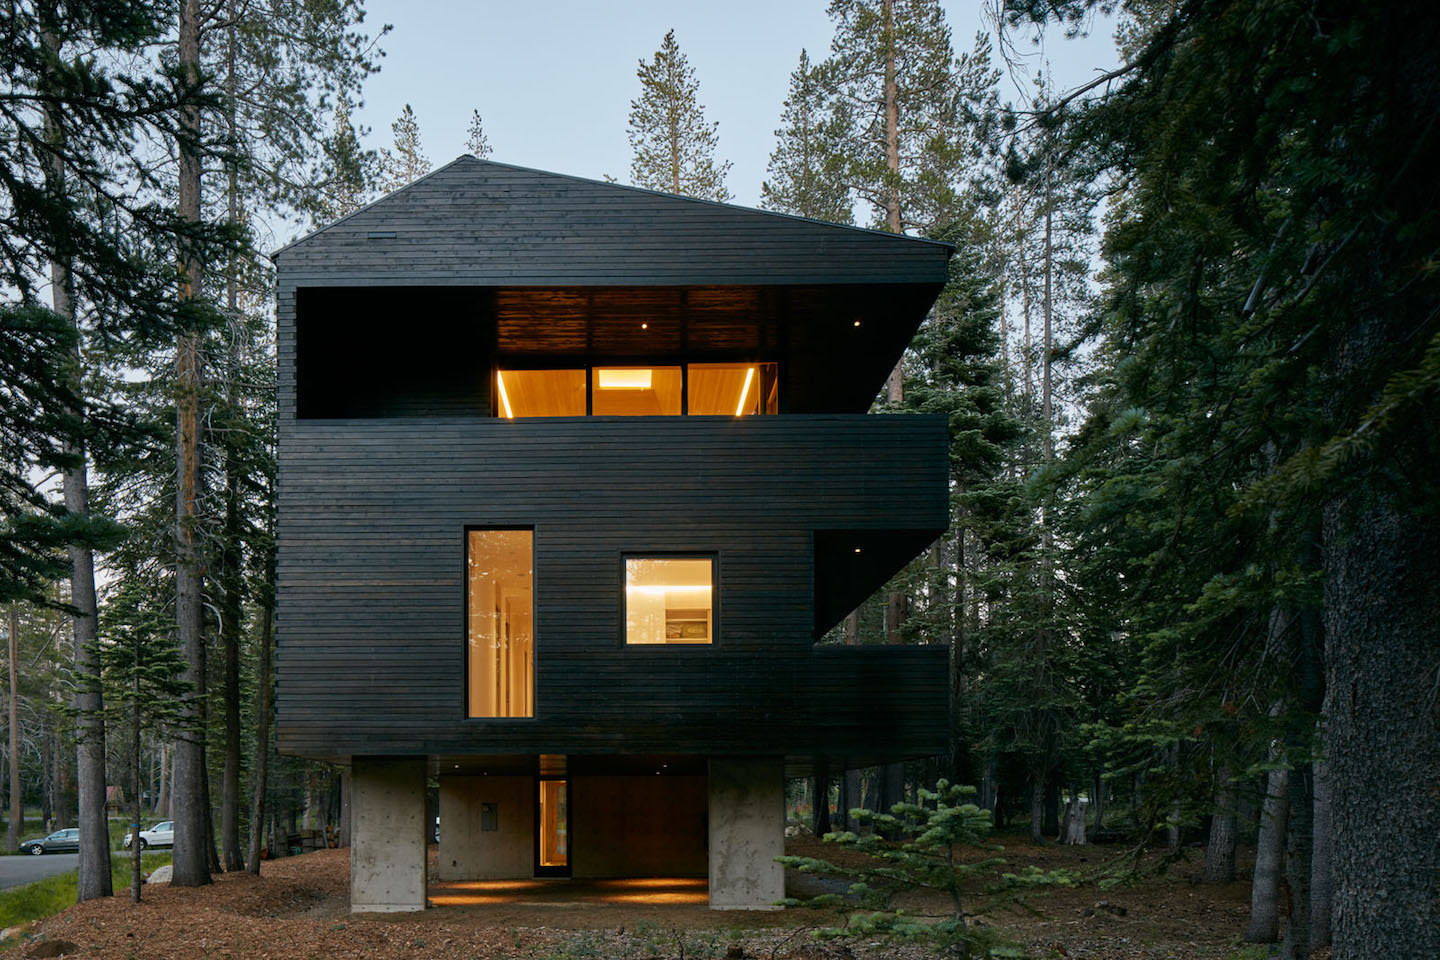 Troll Hus by Mork-Ulnes Architects